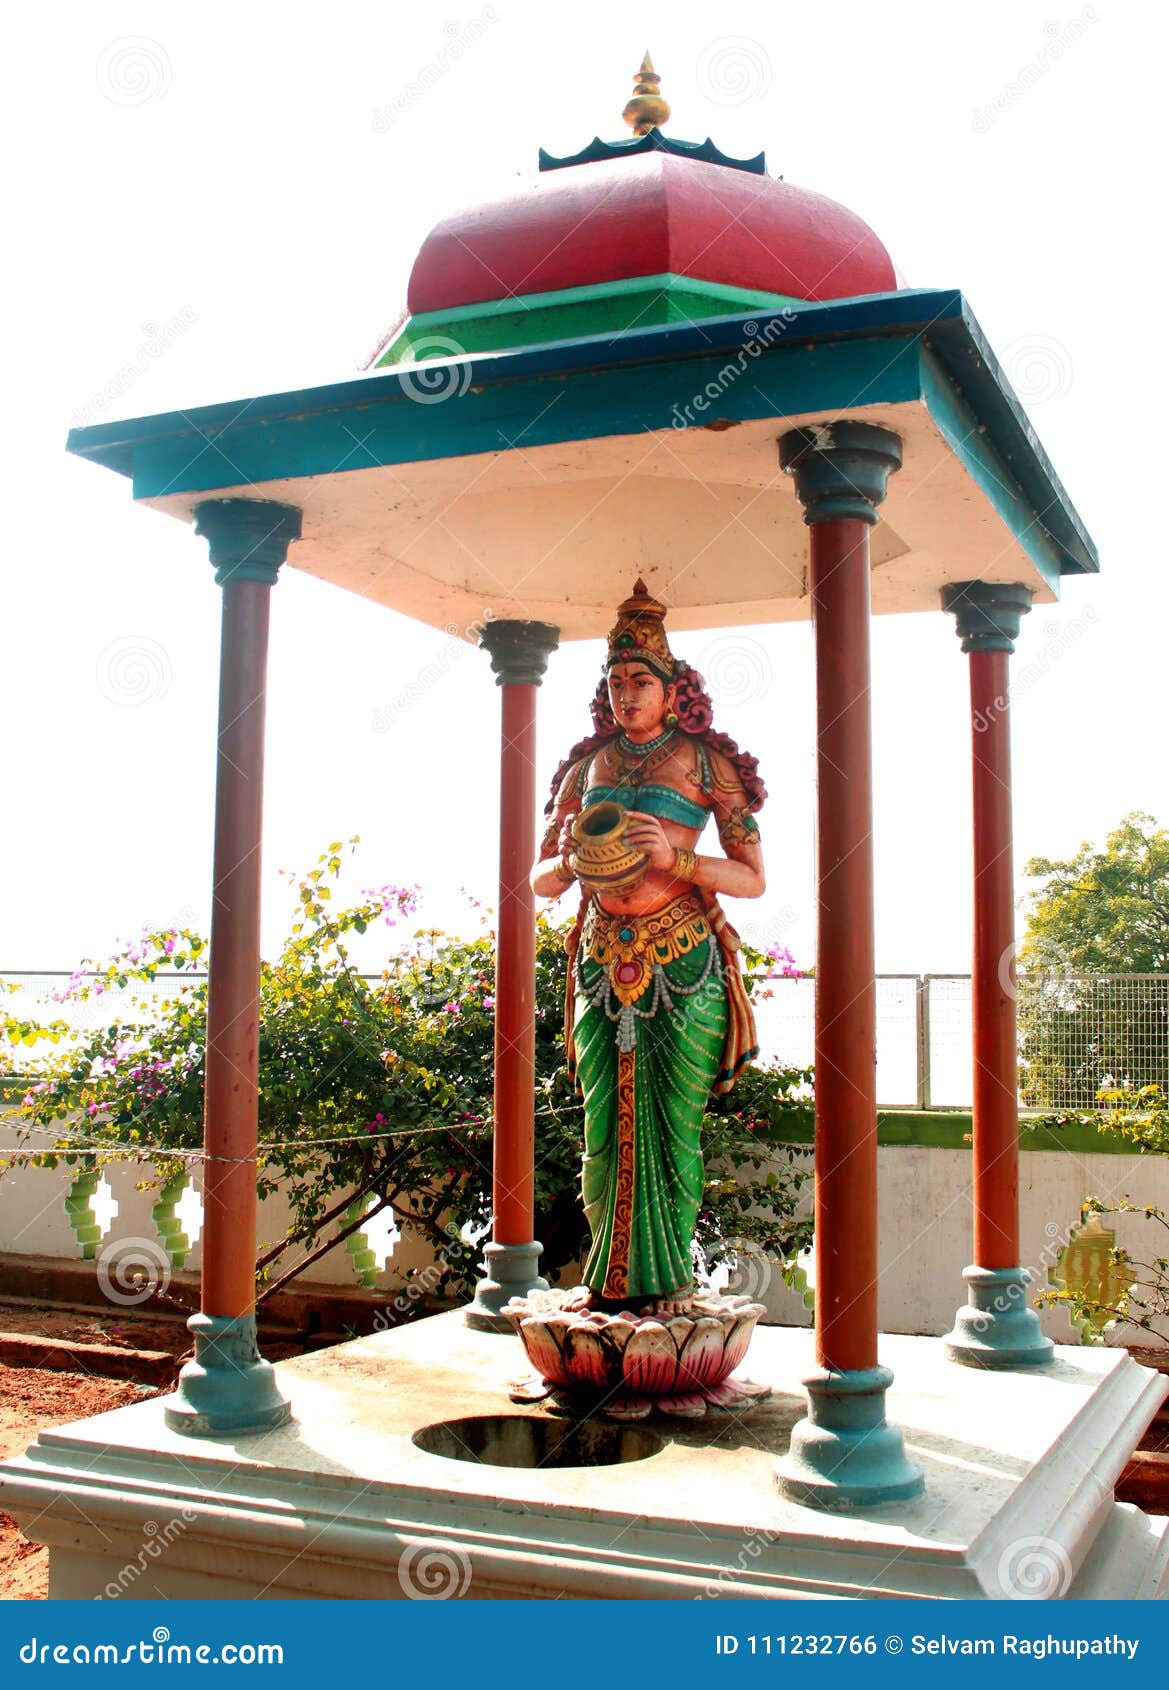 the statue of kaveri amman situated in the the grand kallanai.